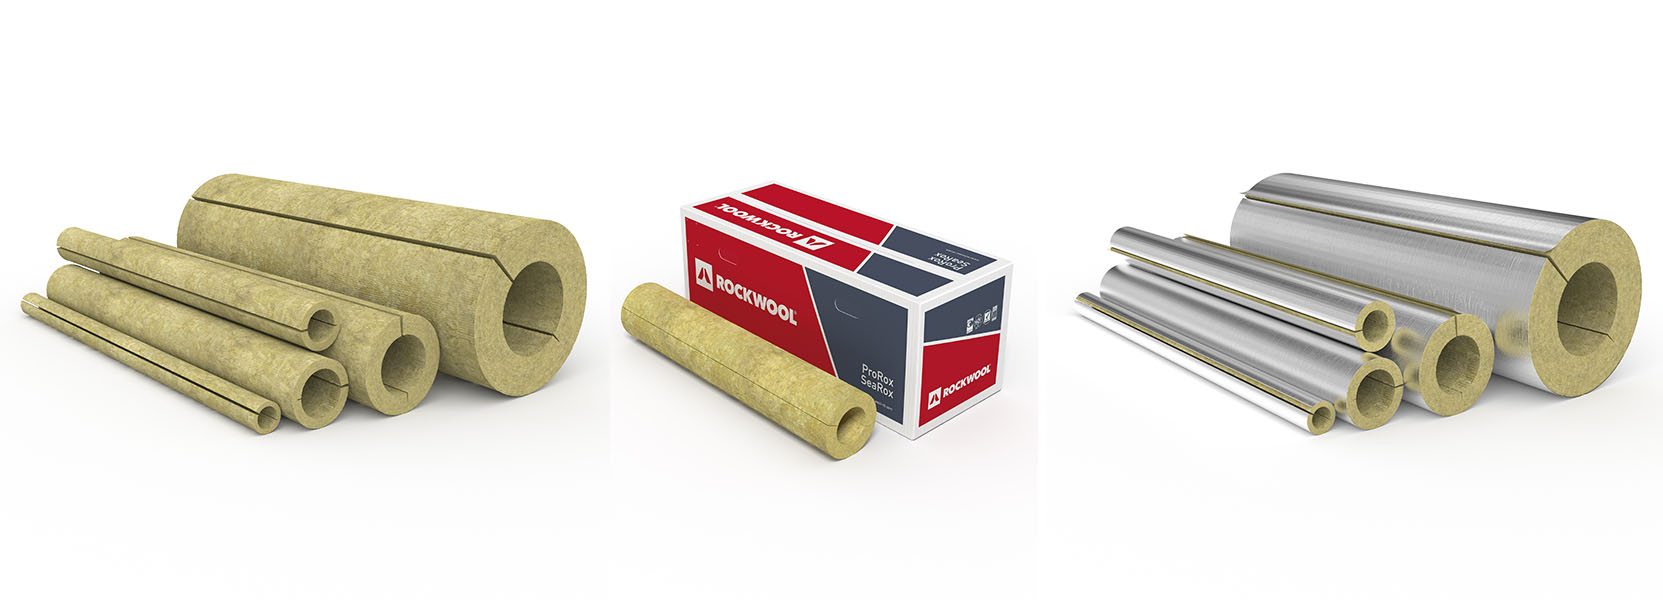 Rockwool Technical Insulation ProRox Pipe Sections